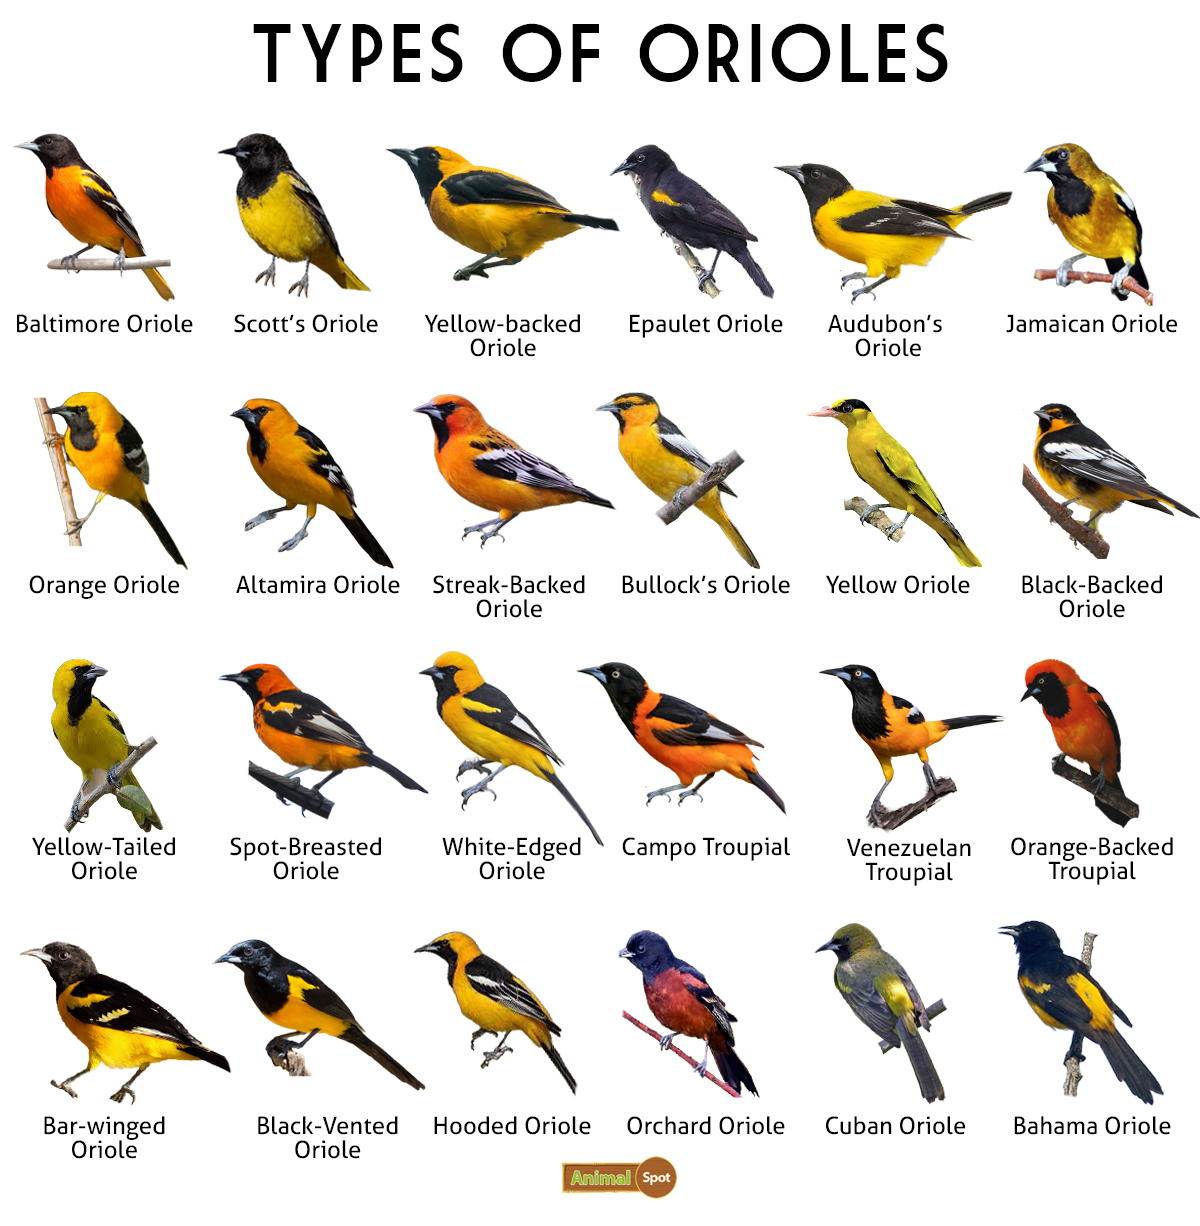 Oriole (New World) Facts, Types, Diet, Reproduction, Classification, Pictures